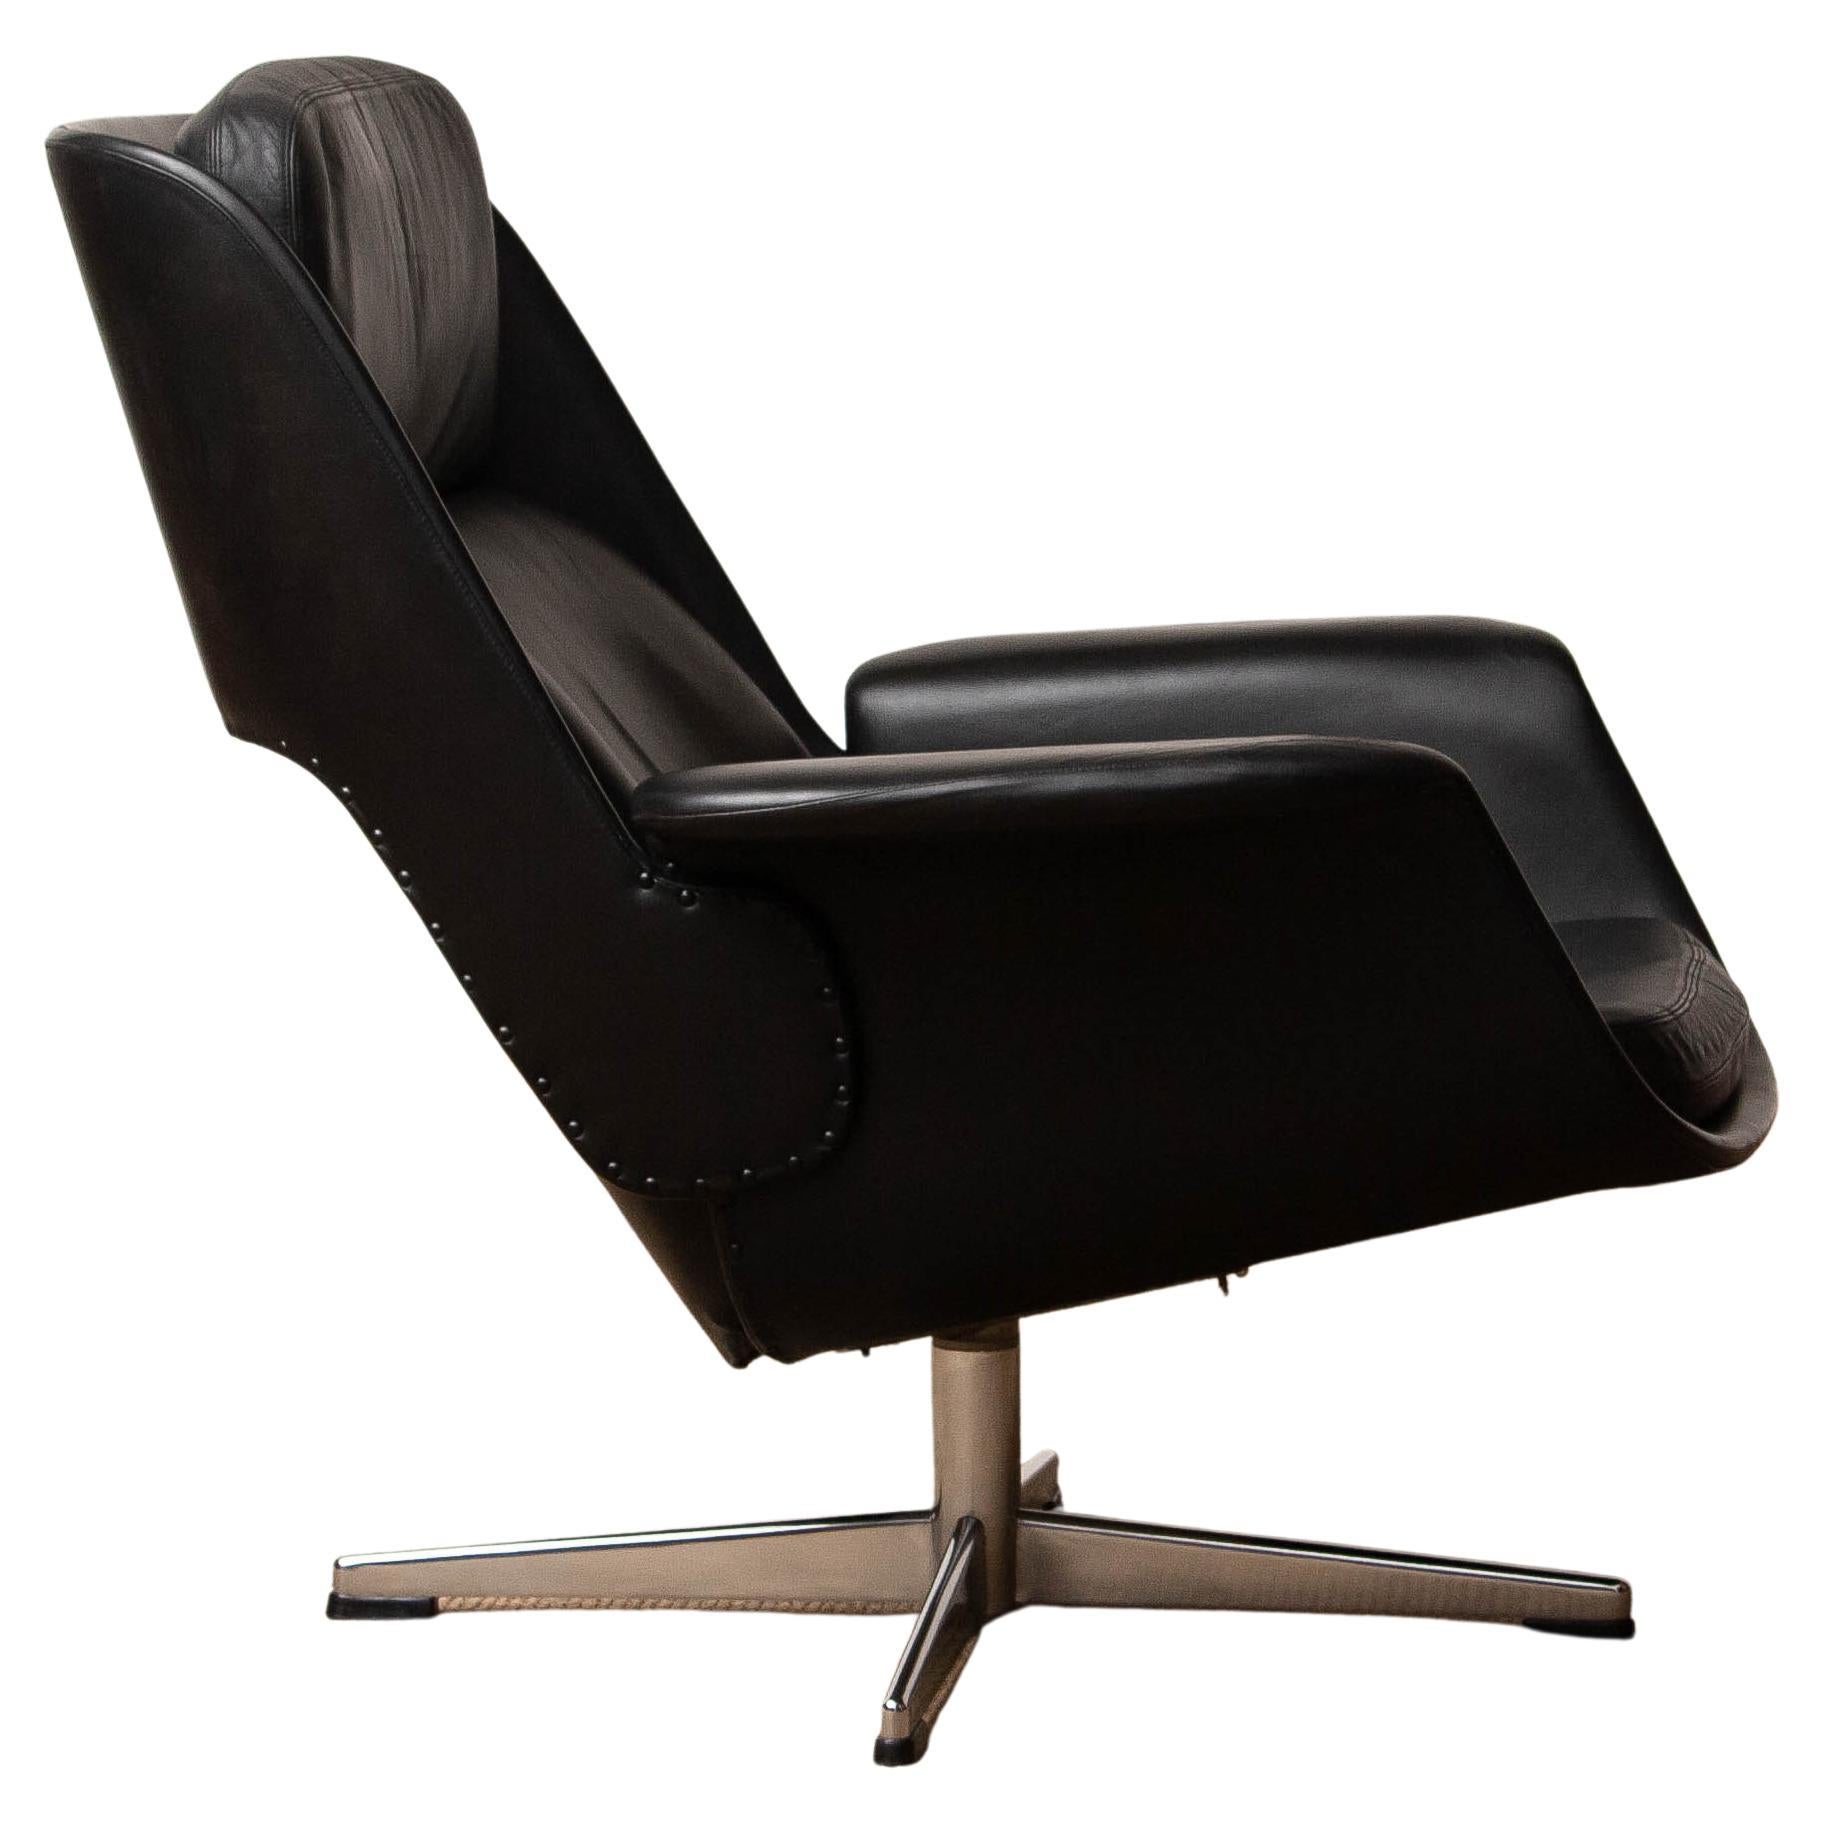 1960's Black Leather 'Rondo' Swivel Chair Designed by Olli Borg for Asko Finland